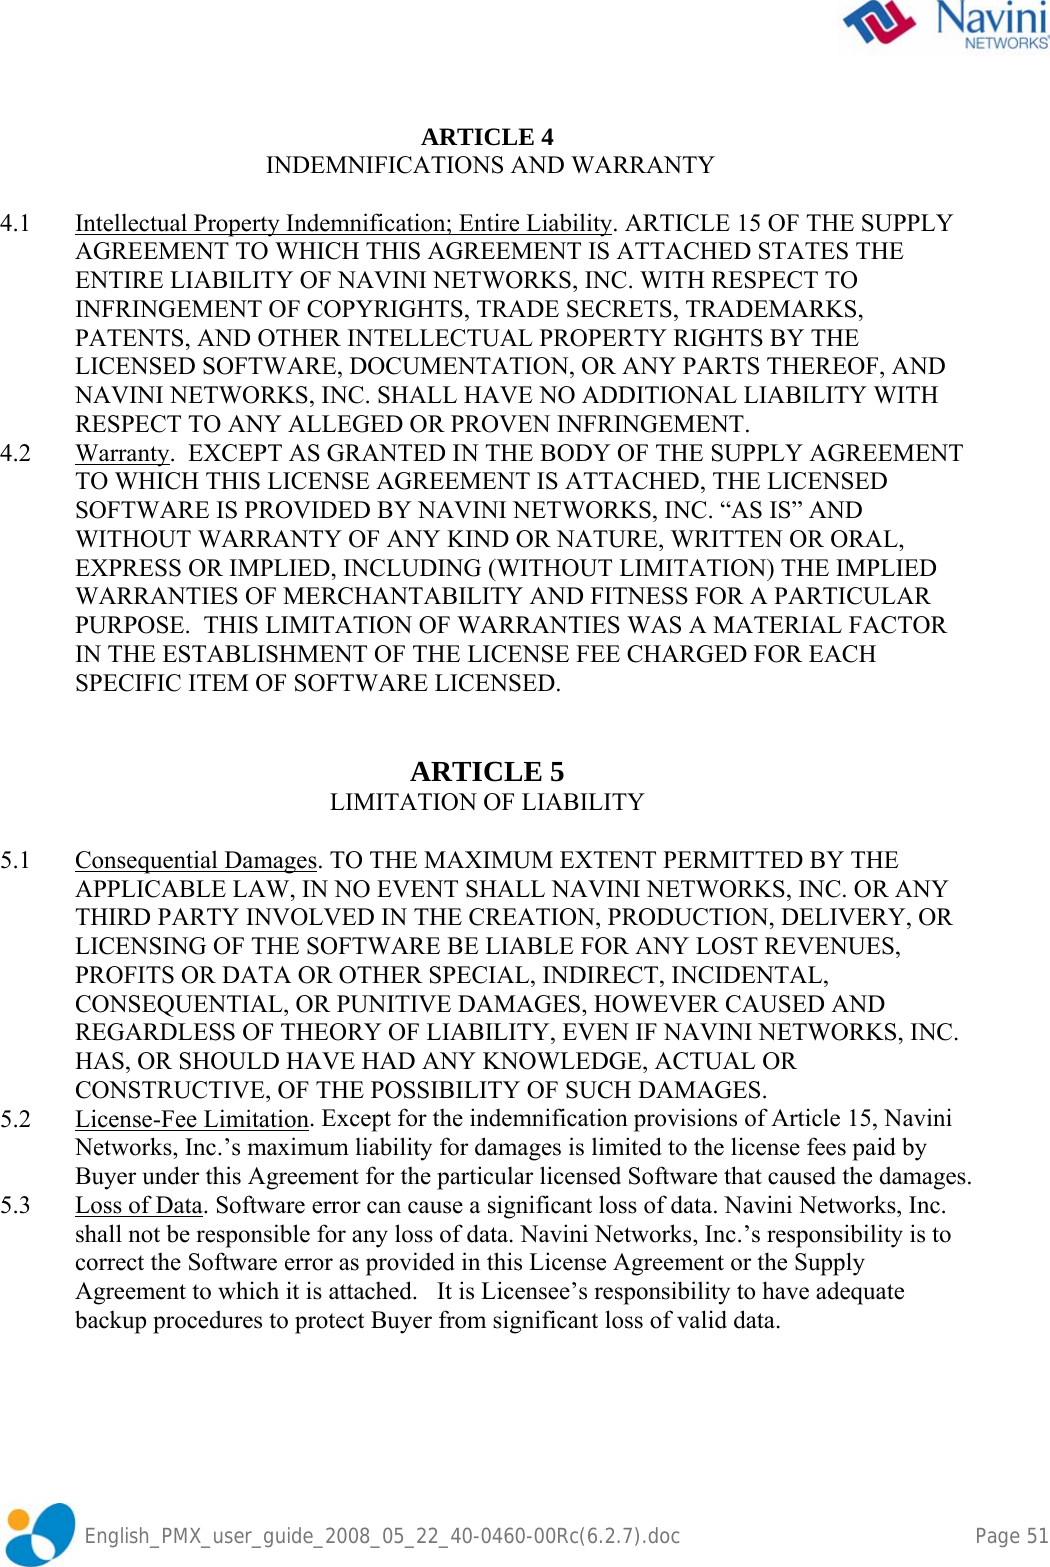               English_PMX_user_guide_2008_05_22_40-0460-00Rc(6.2.7).doc        Page 51  ARTICLE 4  INDEMNIFICATIONS AND WARRANTY   4.1  Intellectual Property Indemnification; Entire Liability. ARTICLE 15 OF THE SUPPLY AGREEMENT TO WHICH THIS AGREEMENT IS ATTACHED STATES THE ENTIRE LIABILITY OF NAVINI NETWORKS, INC. WITH RESPECT TO INFRINGEMENT OF COPYRIGHTS, TRADE SECRETS, TRADEMARKS, PATENTS, AND OTHER INTELLECTUAL PROPERTY RIGHTS BY THE LICENSED SOFTWARE, DOCUMENTATION, OR ANY PARTS THEREOF, AND NAVINI NETWORKS, INC. SHALL HAVE NO ADDITIONAL LIABILITY WITH RESPECT TO ANY ALLEGED OR PROVEN INFRINGEMENT. 4.2 Warranty.  EXCEPT AS GRANTED IN THE BODY OF THE SUPPLY AGREEMENT TO WHICH THIS LICENSE AGREEMENT IS ATTACHED, THE LICENSED SOFTWARE IS PROVIDED BY NAVINI NETWORKS, INC. “AS IS” AND WITHOUT WARRANTY OF ANY KIND OR NATURE, WRITTEN OR ORAL, EXPRESS OR IMPLIED, INCLUDING (WITHOUT LIMITATION) THE IMPLIED WARRANTIES OF MERCHANTABILITY AND FITNESS FOR A PARTICULAR PURPOSE.  THIS LIMITATION OF WARRANTIES WAS A MATERIAL FACTOR IN THE ESTABLISHMENT OF THE LICENSE FEE CHARGED FOR EACH SPECIFIC ITEM OF SOFTWARE LICENSED.   ARTICLE 5 LIMITATION OF LIABILITY   5.1 Consequential Damages. TO THE MAXIMUM EXTENT PERMITTED BY THE APPLICABLE LAW, IN NO EVENT SHALL NAVINI NETWORKS, INC. OR ANY THIRD PARTY INVOLVED IN THE CREATION, PRODUCTION, DELIVERY, OR LICENSING OF THE SOFTWARE BE LIABLE FOR ANY LOST REVENUES, PROFITS OR DATA OR OTHER SPECIAL, INDIRECT, INCIDENTAL, CONSEQUENTIAL, OR PUNITIVE DAMAGES, HOWEVER CAUSED AND REGARDLESS OF THEORY OF LIABILITY, EVEN IF NAVINI NETWORKS, INC. HAS, OR SHOULD HAVE HAD ANY KNOWLEDGE, ACTUAL OR CONSTRUCTIVE, OF THE POSSIBILITY OF SUCH DAMAGES. 5.2 License-Fee Limitation. Except for the indemnification provisions of Article 15, Navini Networks, Inc.’s maximum liability for damages is limited to the license fees paid by Buyer under this Agreement for the particular licensed Software that caused the damages. 5.3  Loss of Data. Software error can cause a significant loss of data. Navini Networks, Inc. shall not be responsible for any loss of data. Navini Networks, Inc.’s responsibility is to correct the Software error as provided in this License Agreement or the Supply Agreement to which it is attached.   It is Licensee’s responsibility to have adequate backup procedures to protect Buyer from significant loss of valid data. 